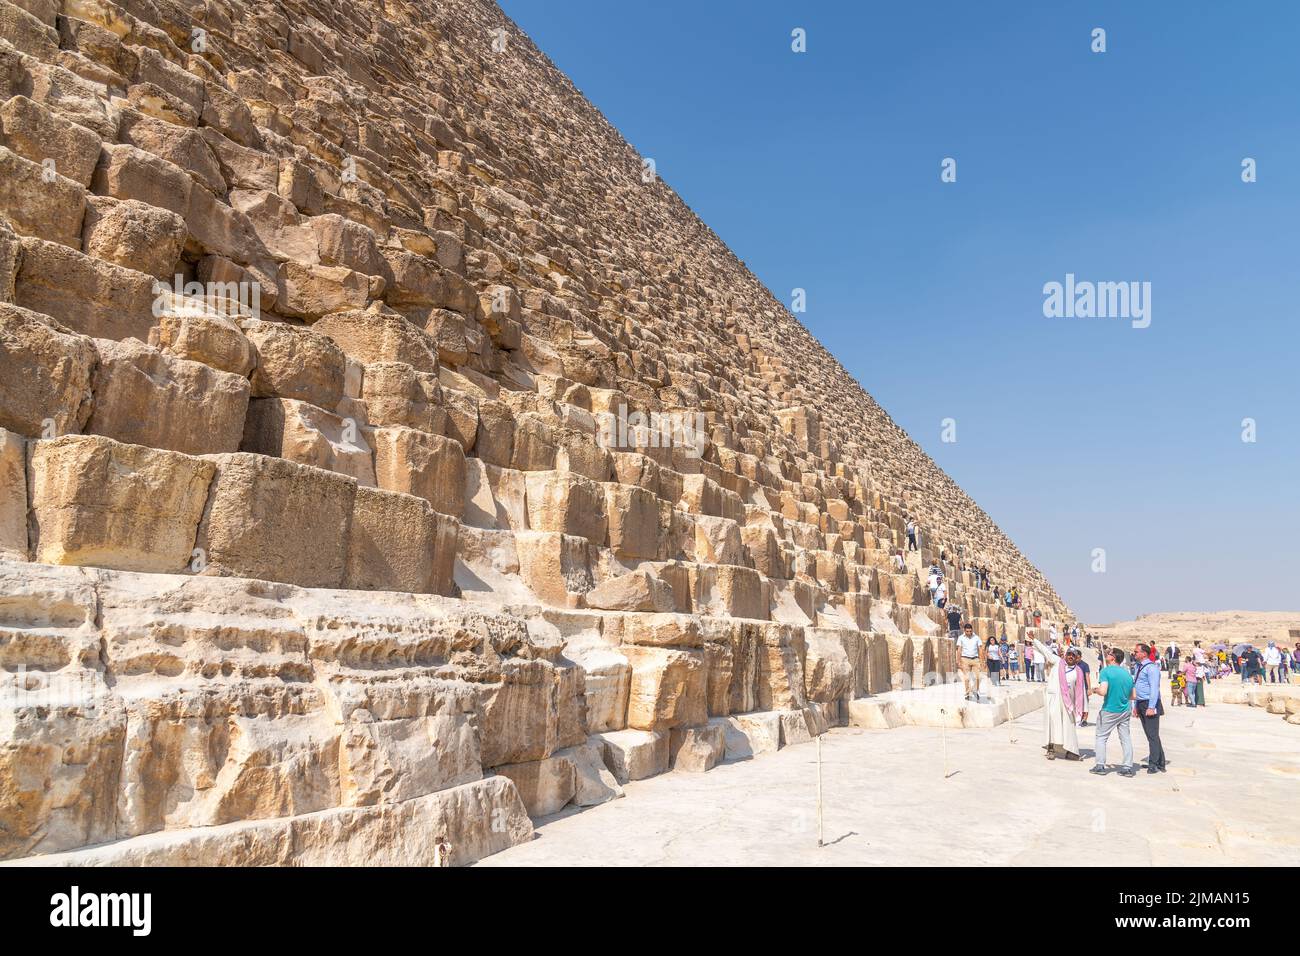 Giza, Egypt; July 29, 2022 - A view of the huge pyramid of Cheops, Giza, Egypt. Stock Photo